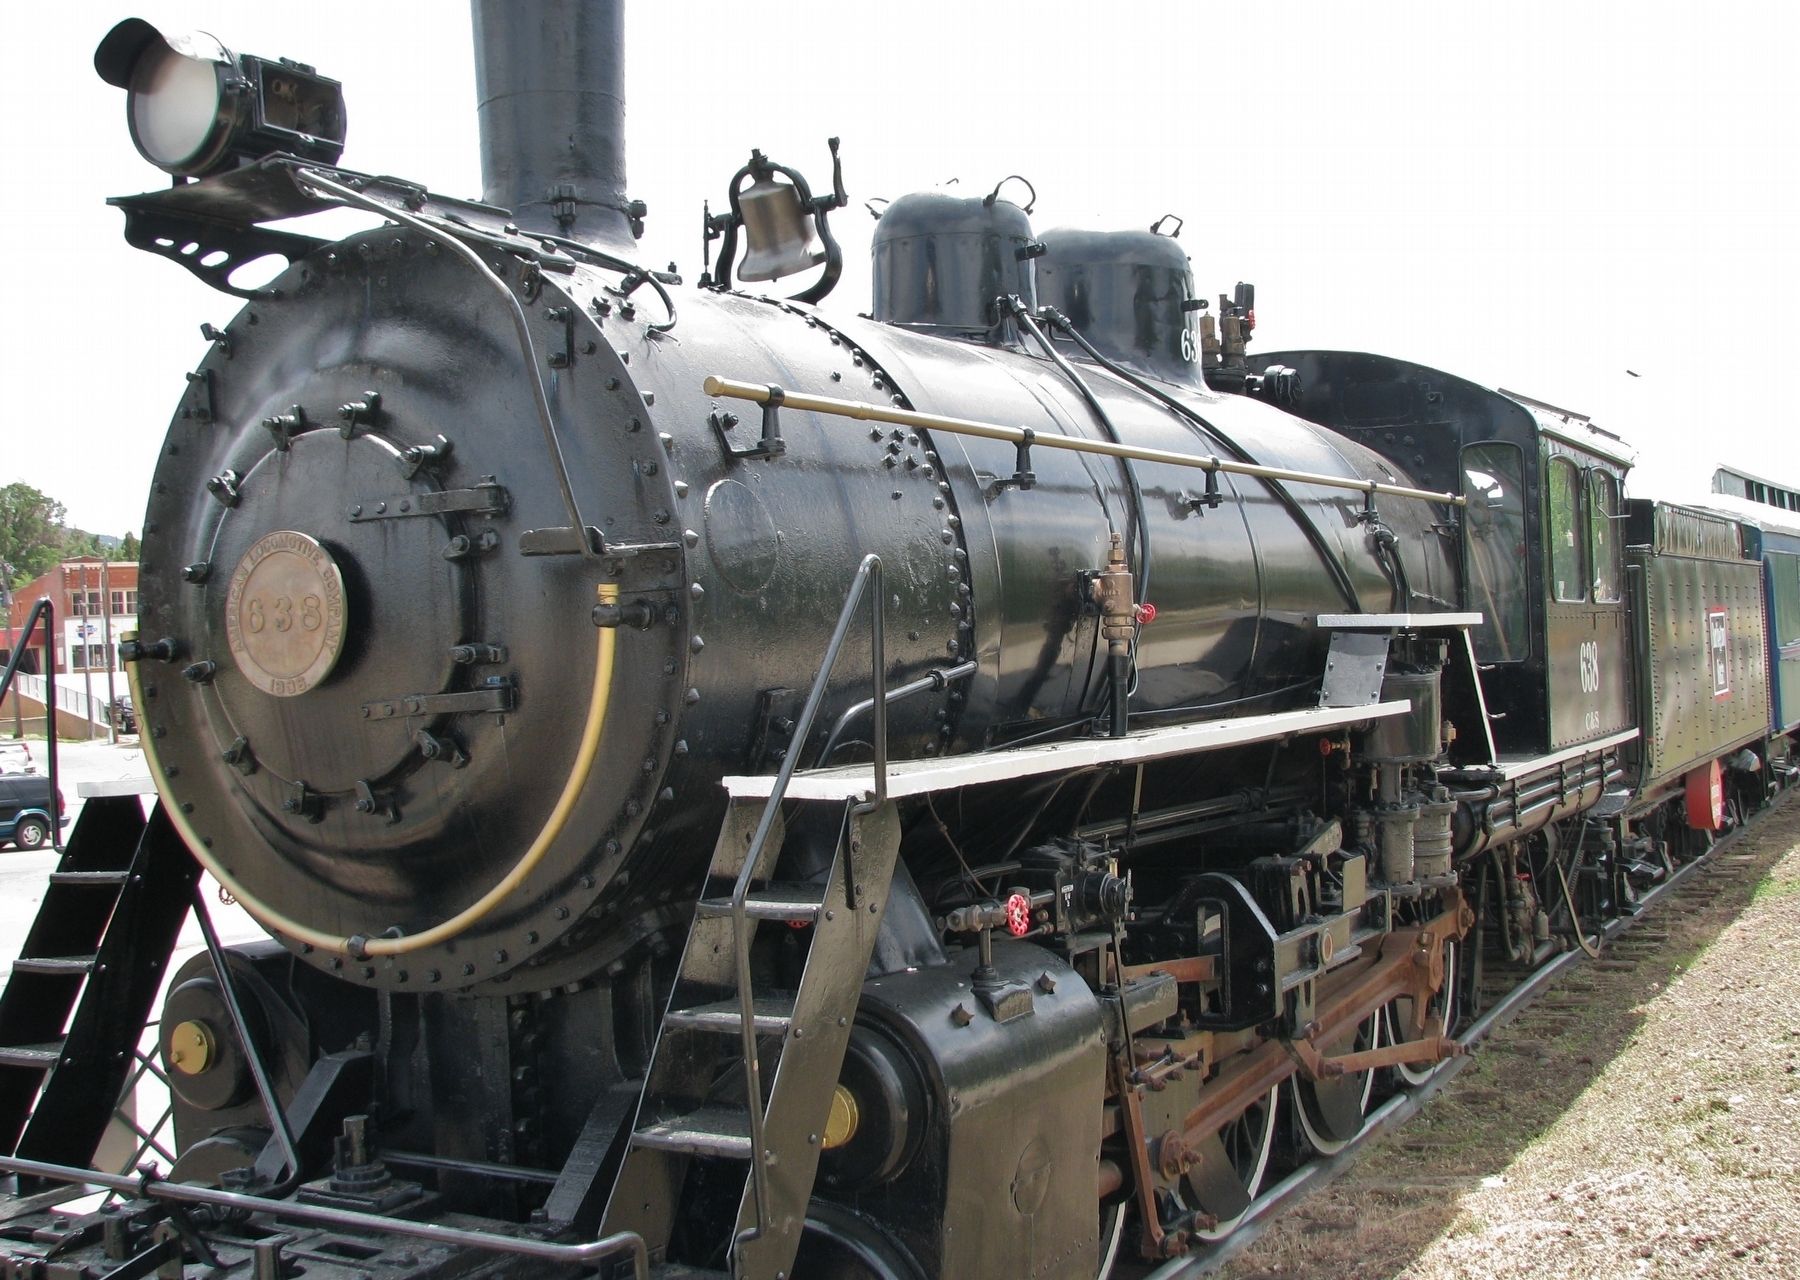 Colorado & Southern R.R. Locomotive #638 image. Click for full size.